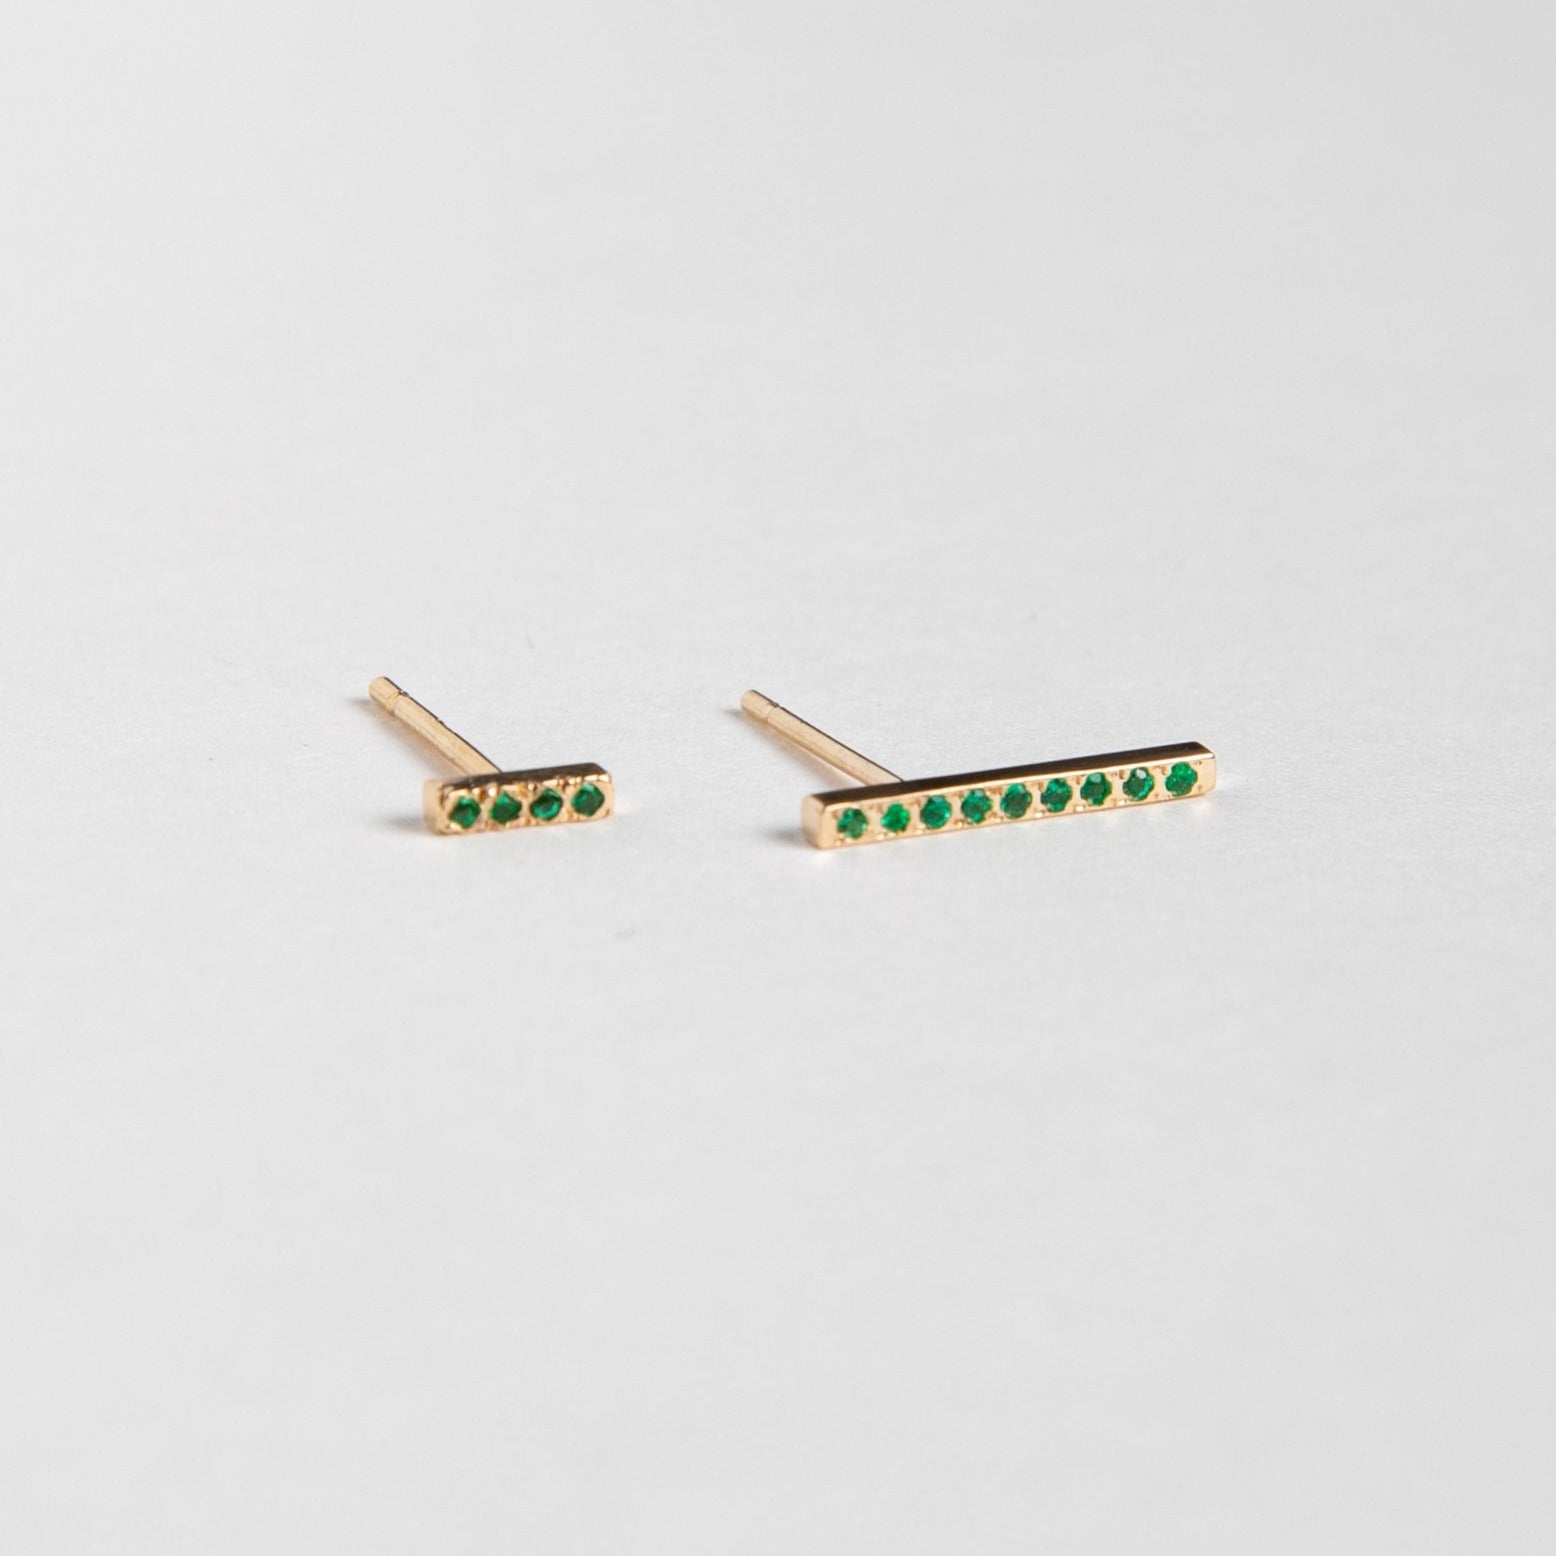 Vilko Plain Stud in 14k Yellow Gold set with Emerald by SHW Fine Jewelry